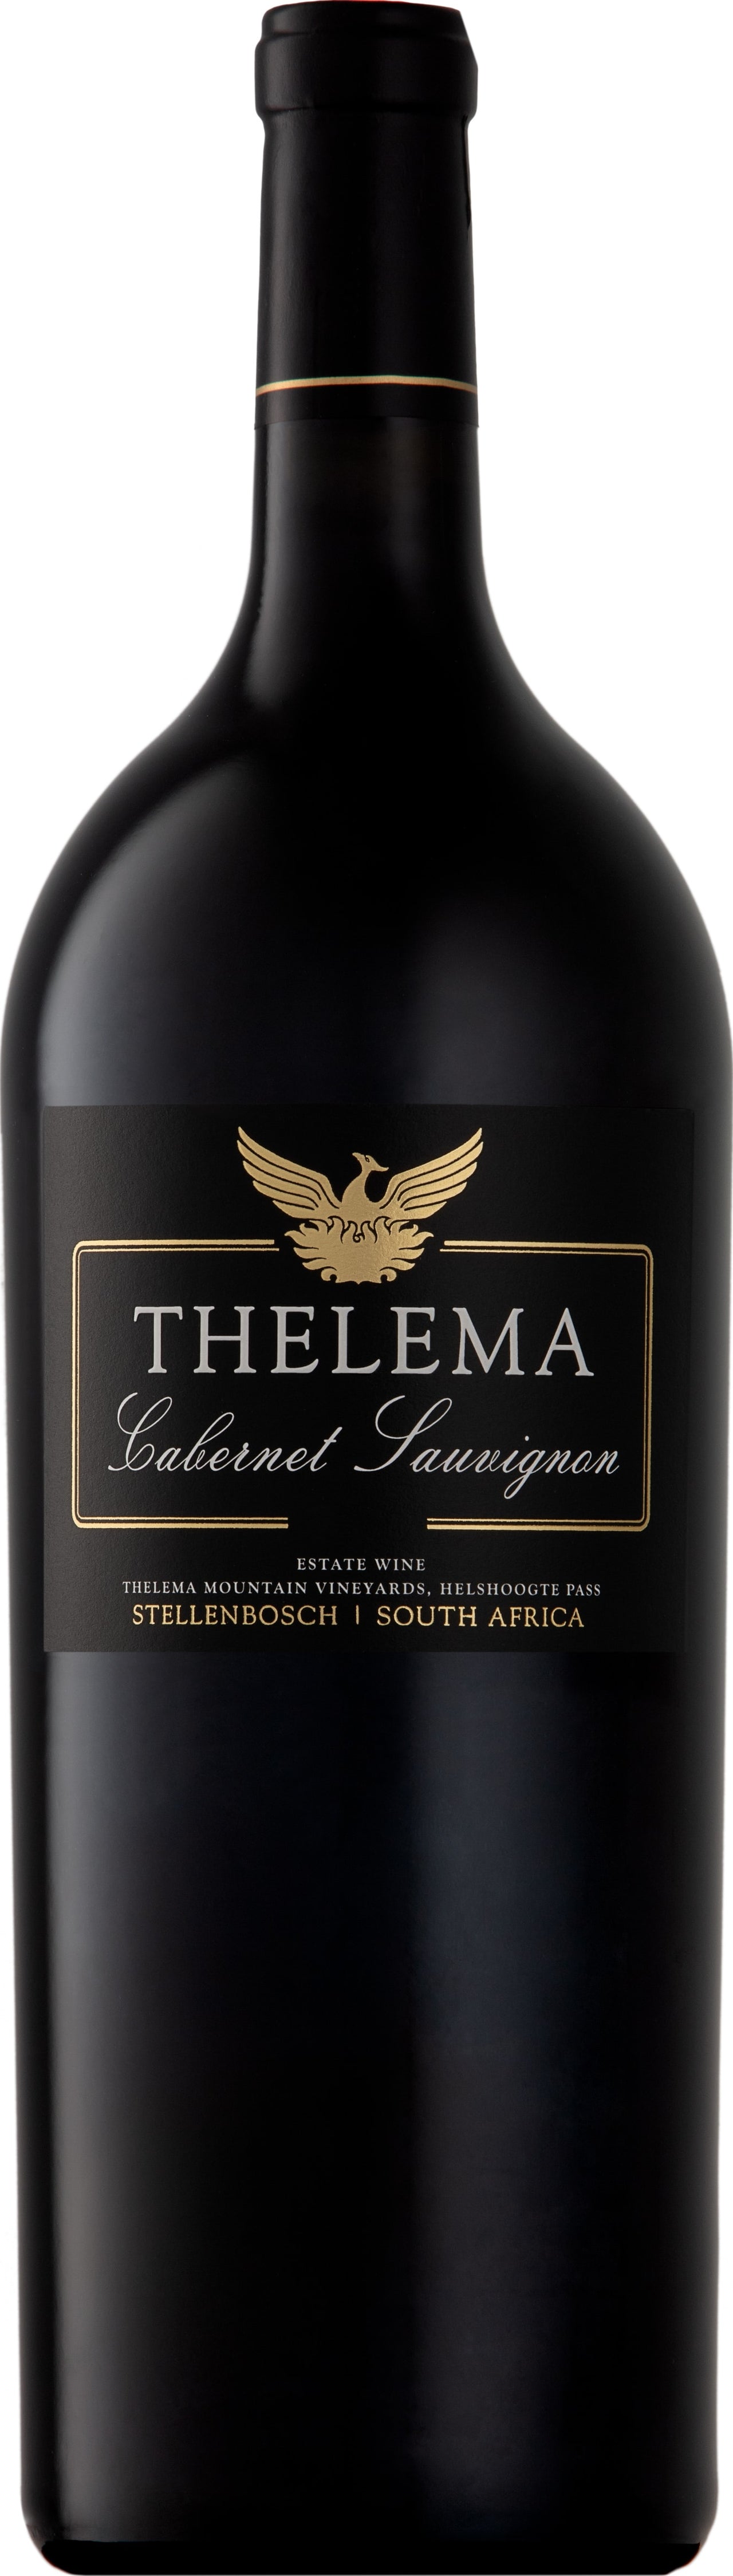 Thelema Mountain Vineyards Cabernet Sauvignon Magnum 2020 150cl - Buy Thelema Mountain Vineyards Wines from GREAT WINES DIRECT wine shop